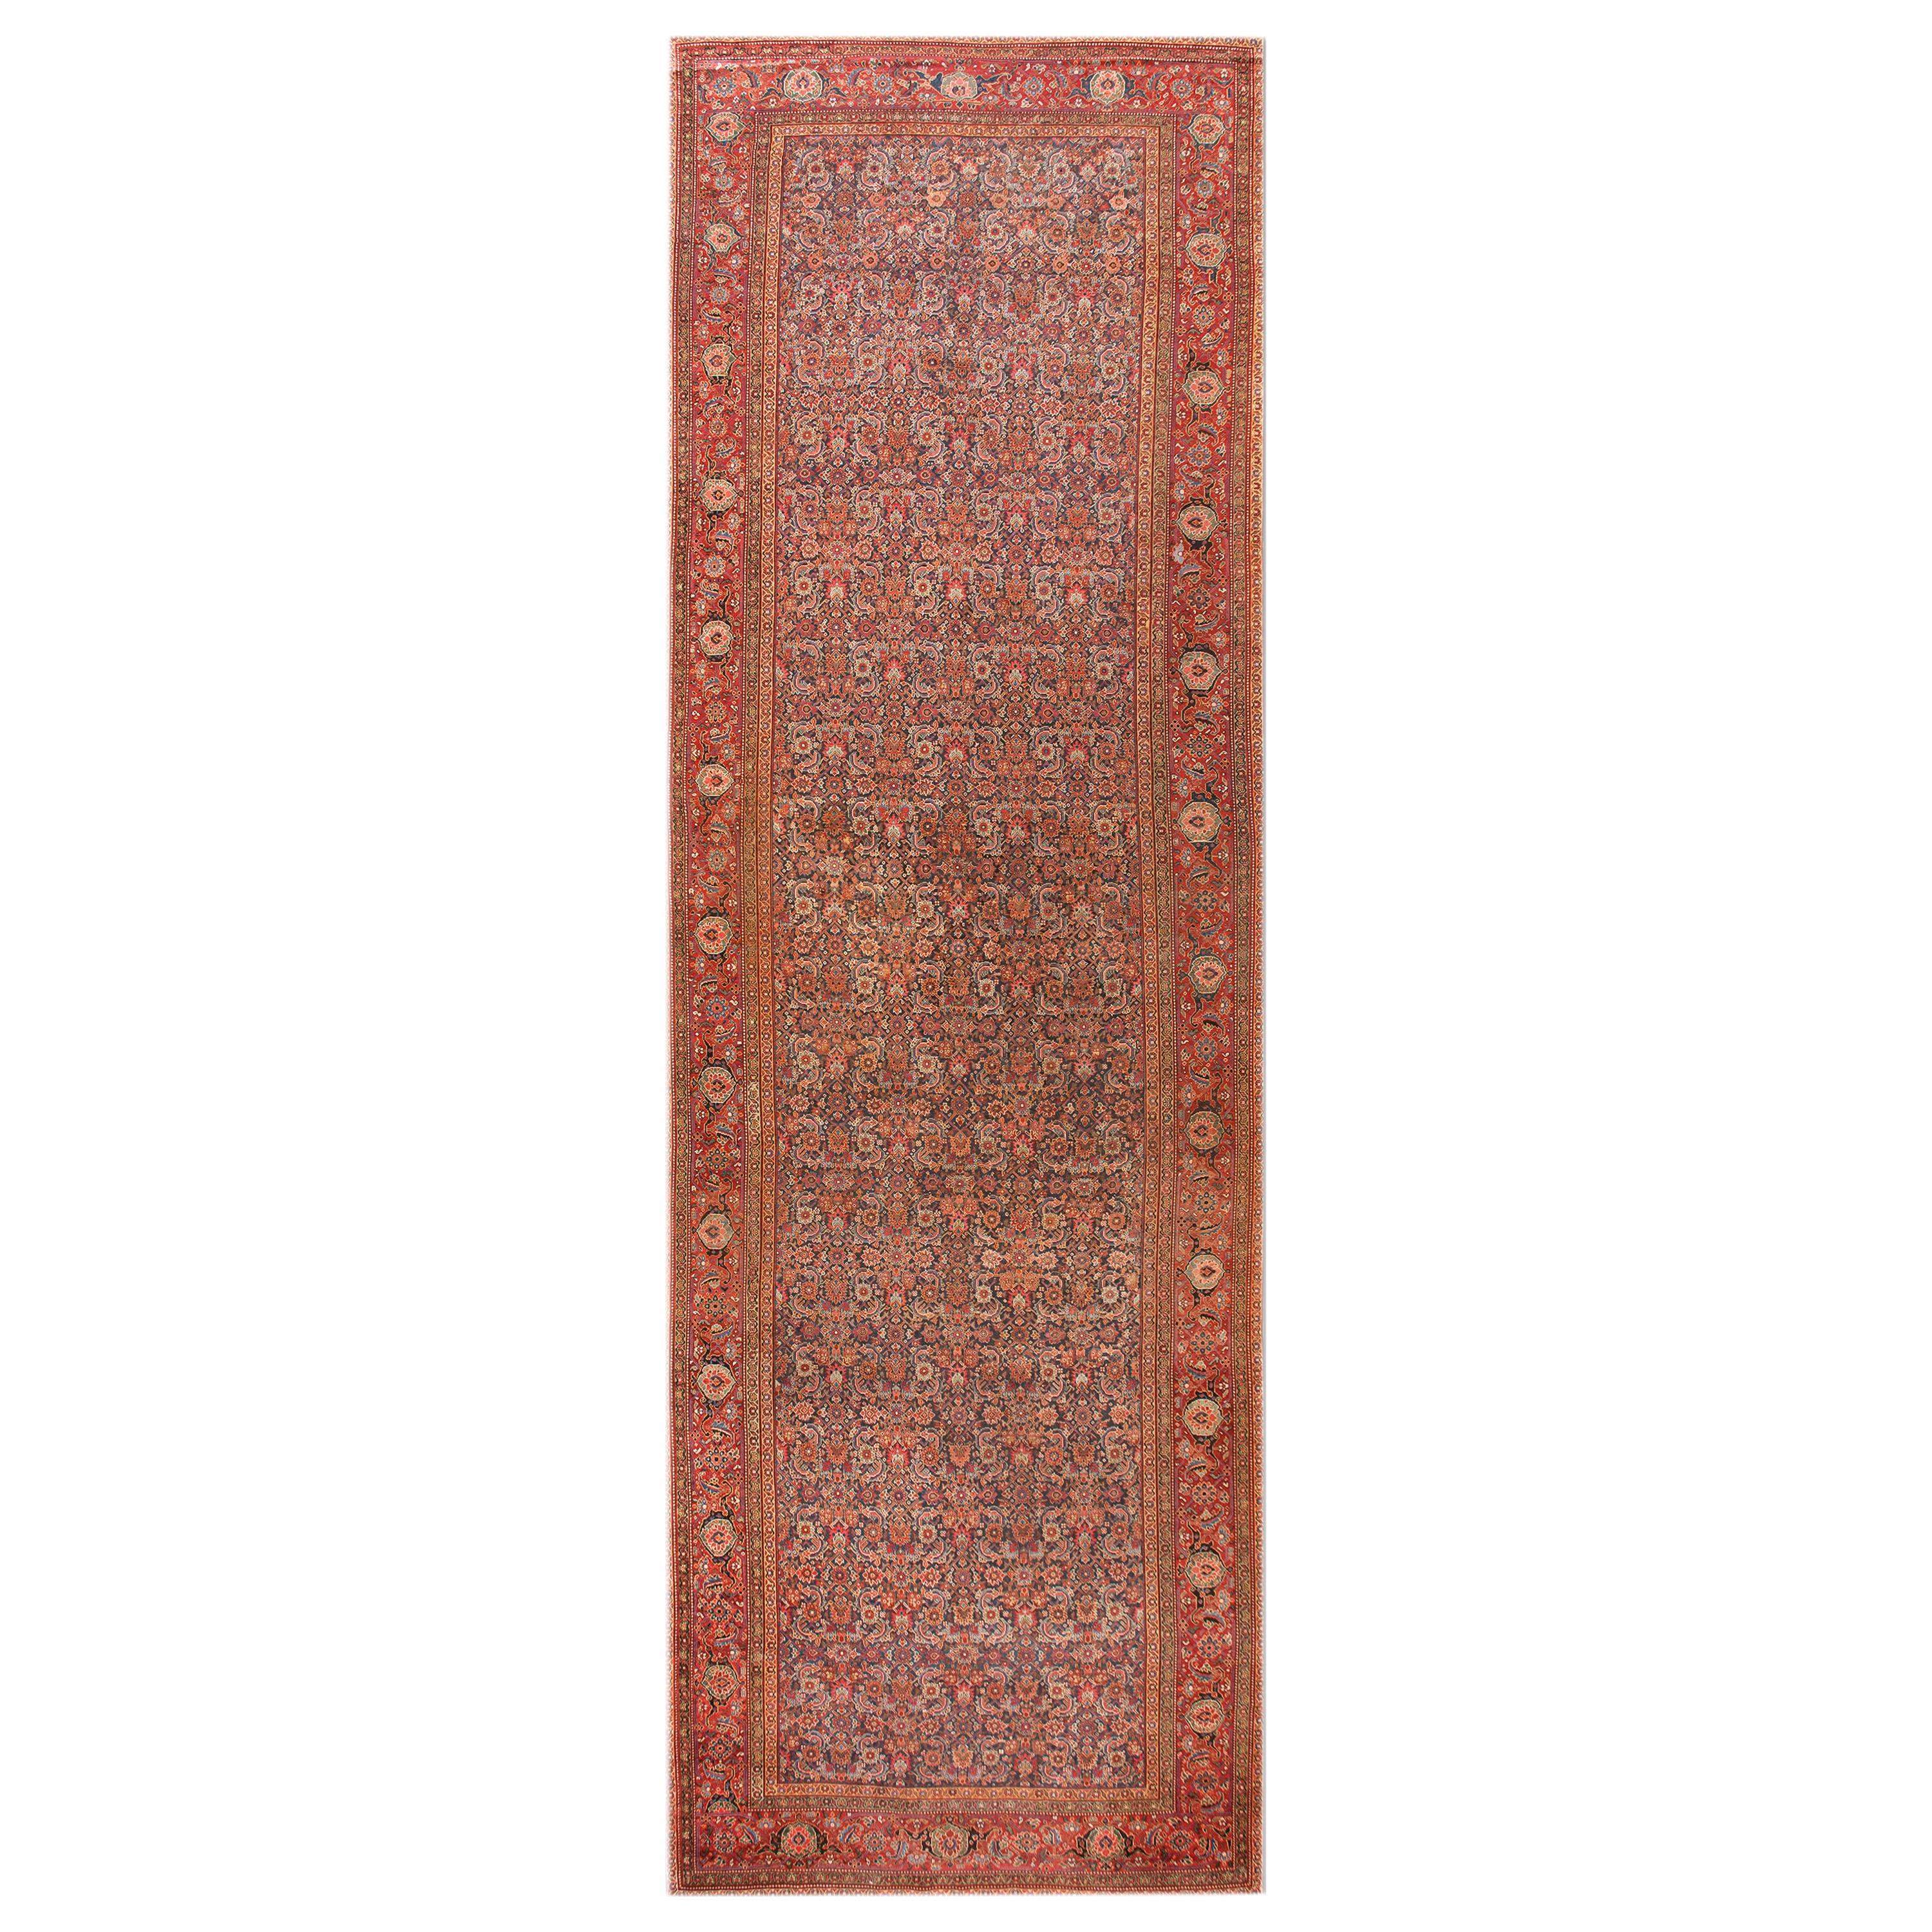  N.W.Persian Rug For Sale